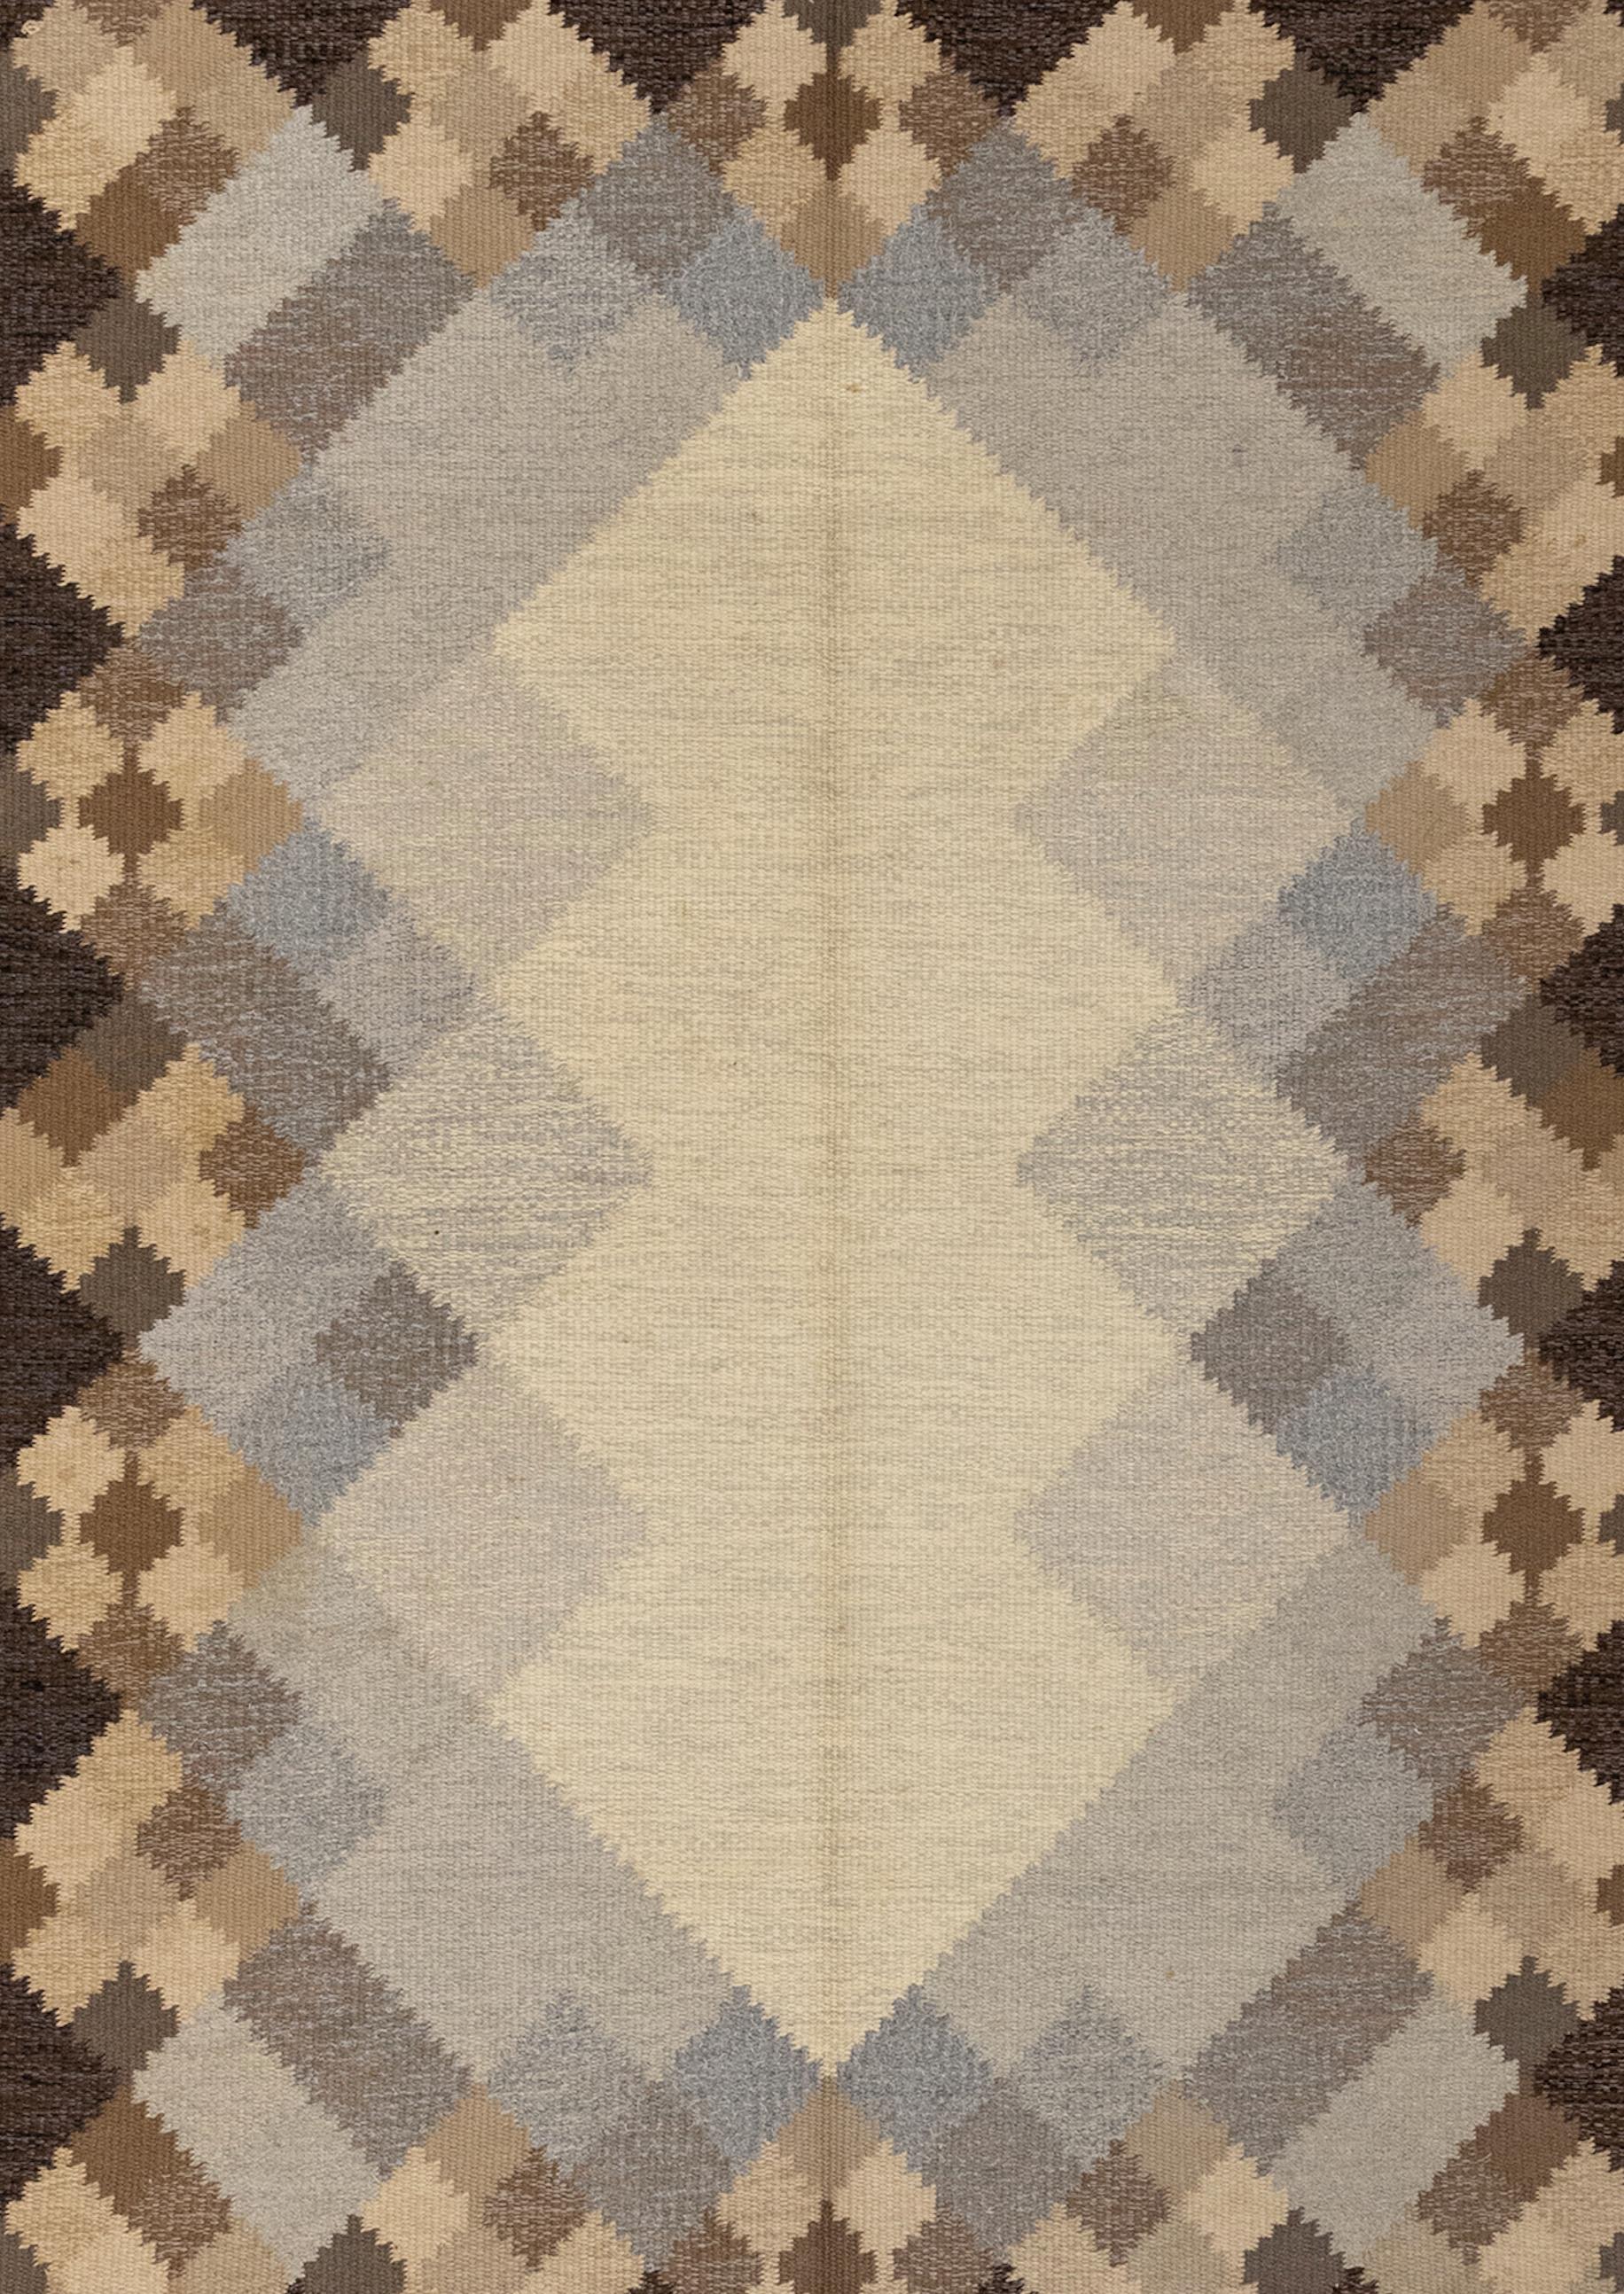 This Swedish kilim rug, signed by designer Britta Swefors is from mid-20th century. It's an eye catching design and moves the viewer's eye from the outer edges and draws to the centre. It features a border pattern of rectangle and diamond shapes in